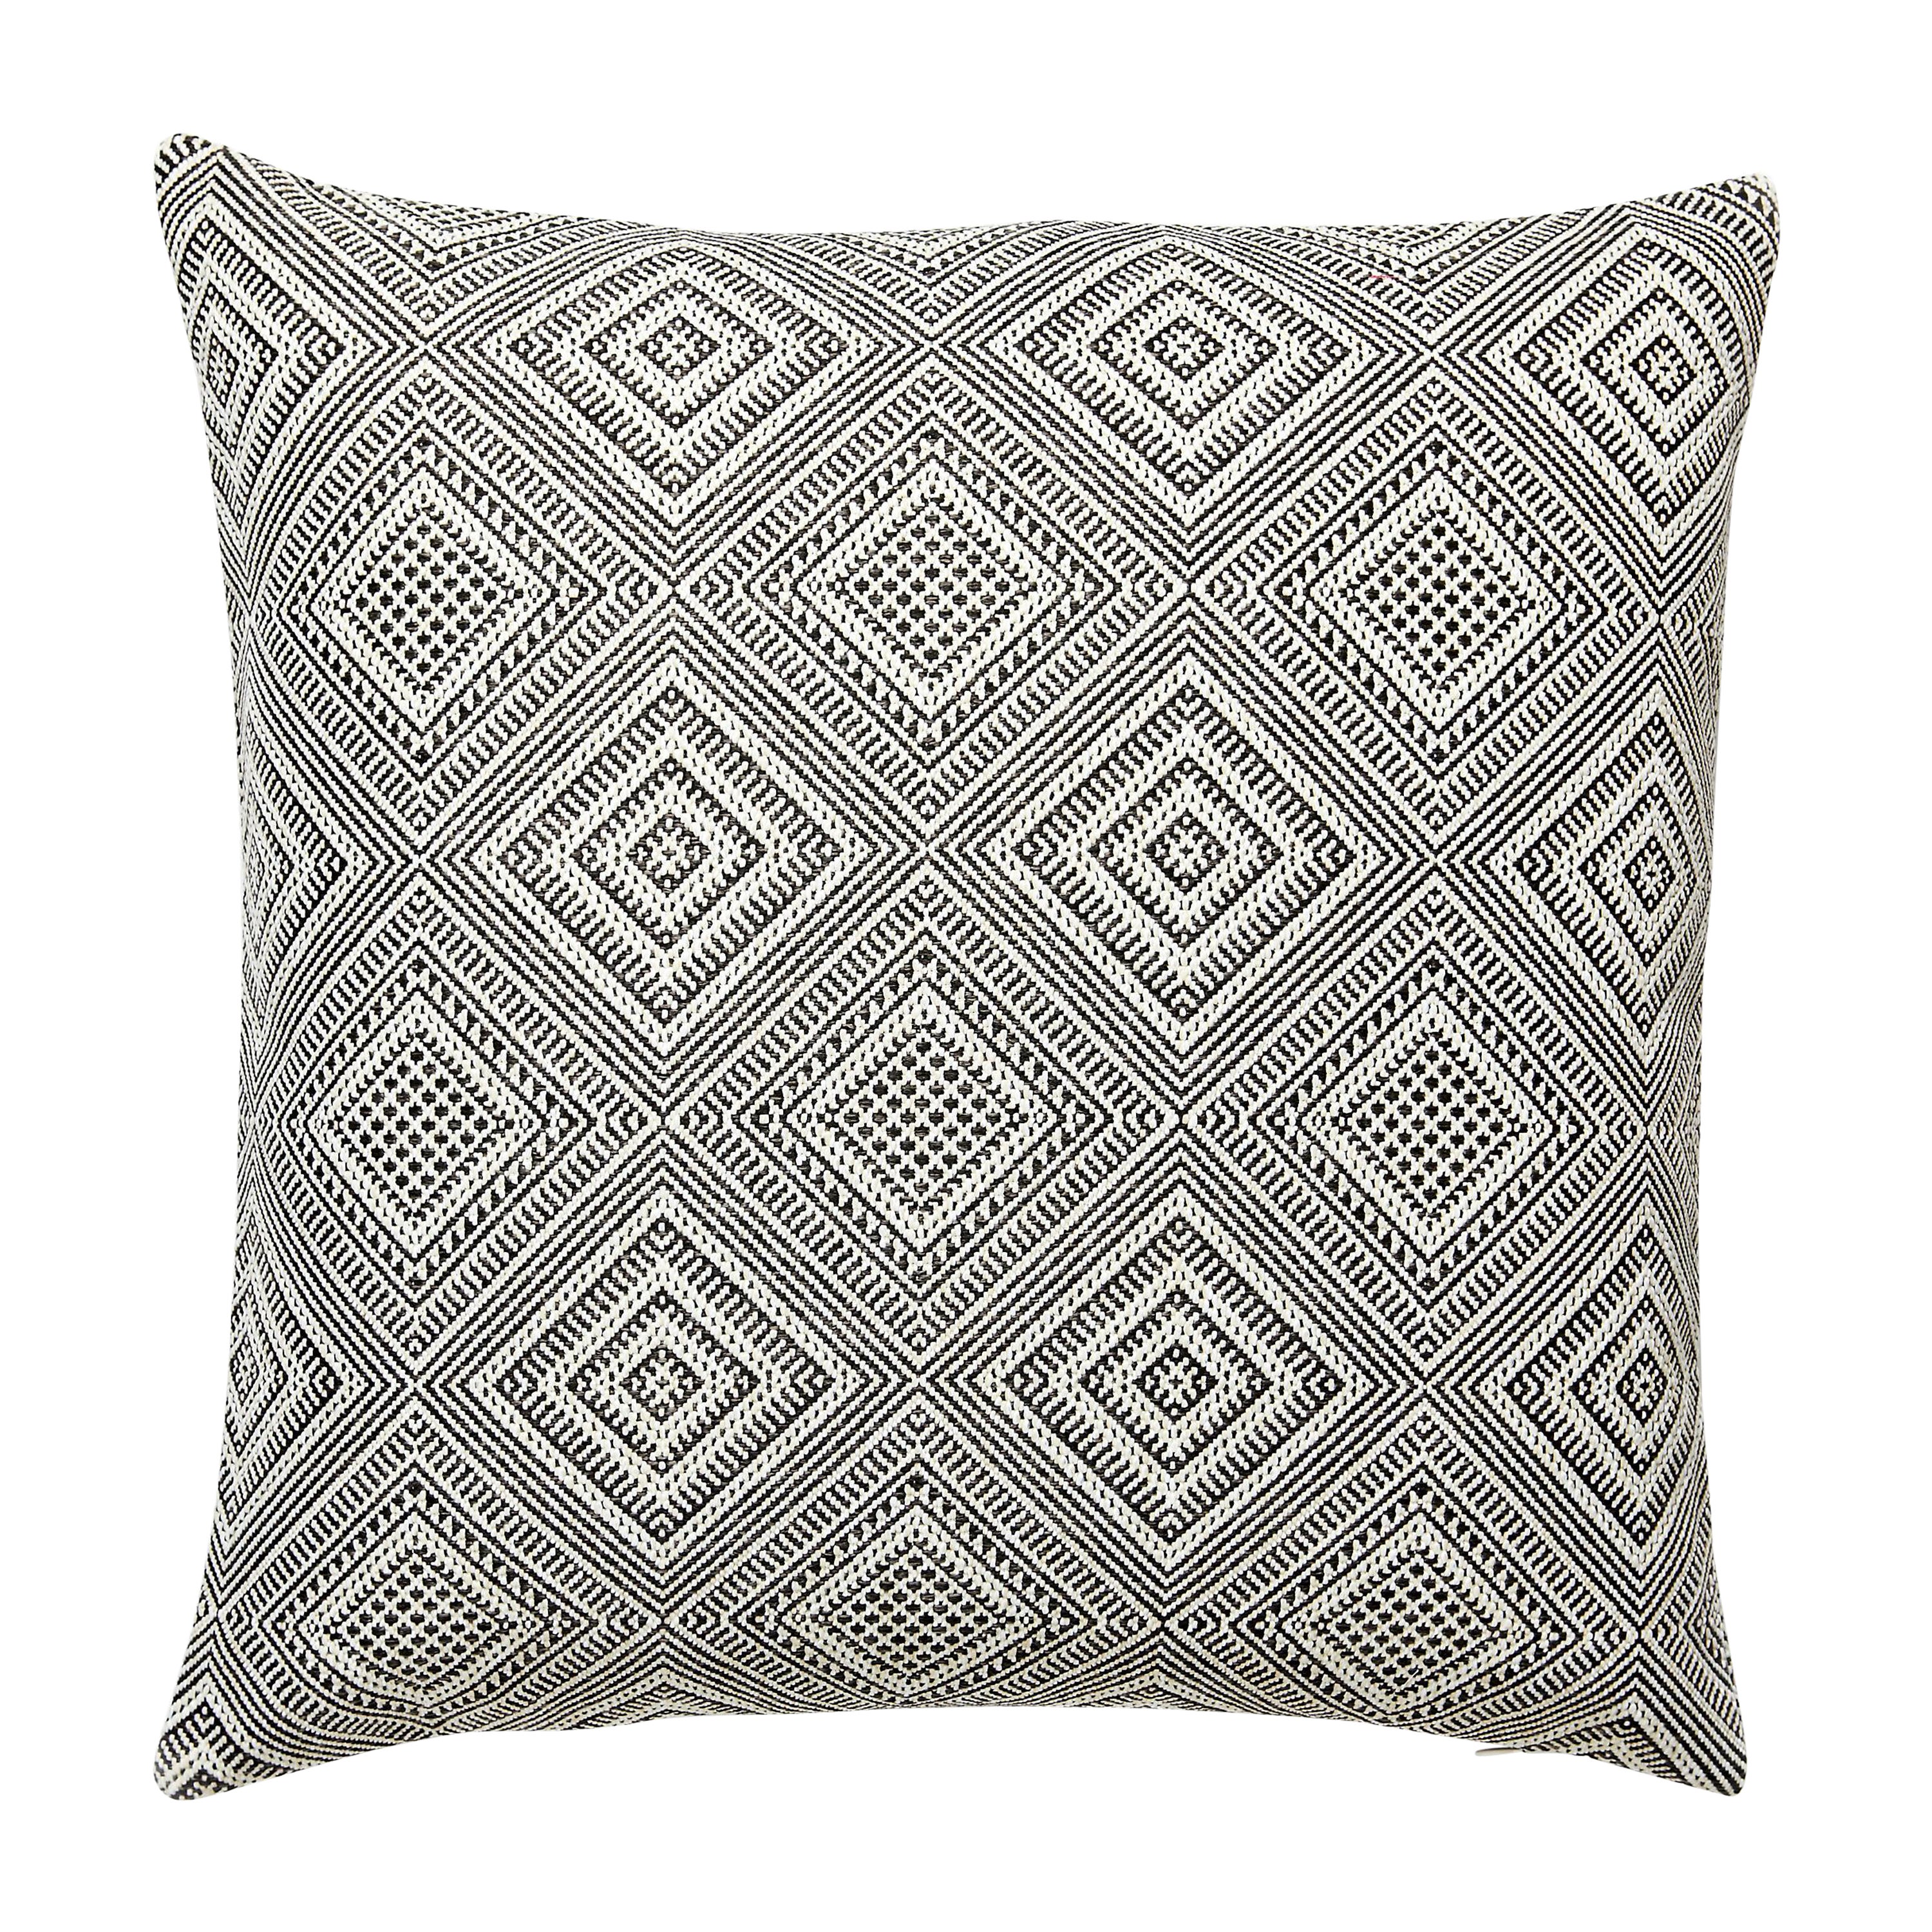 Antigua Weave Outdoor Pillow For Sale